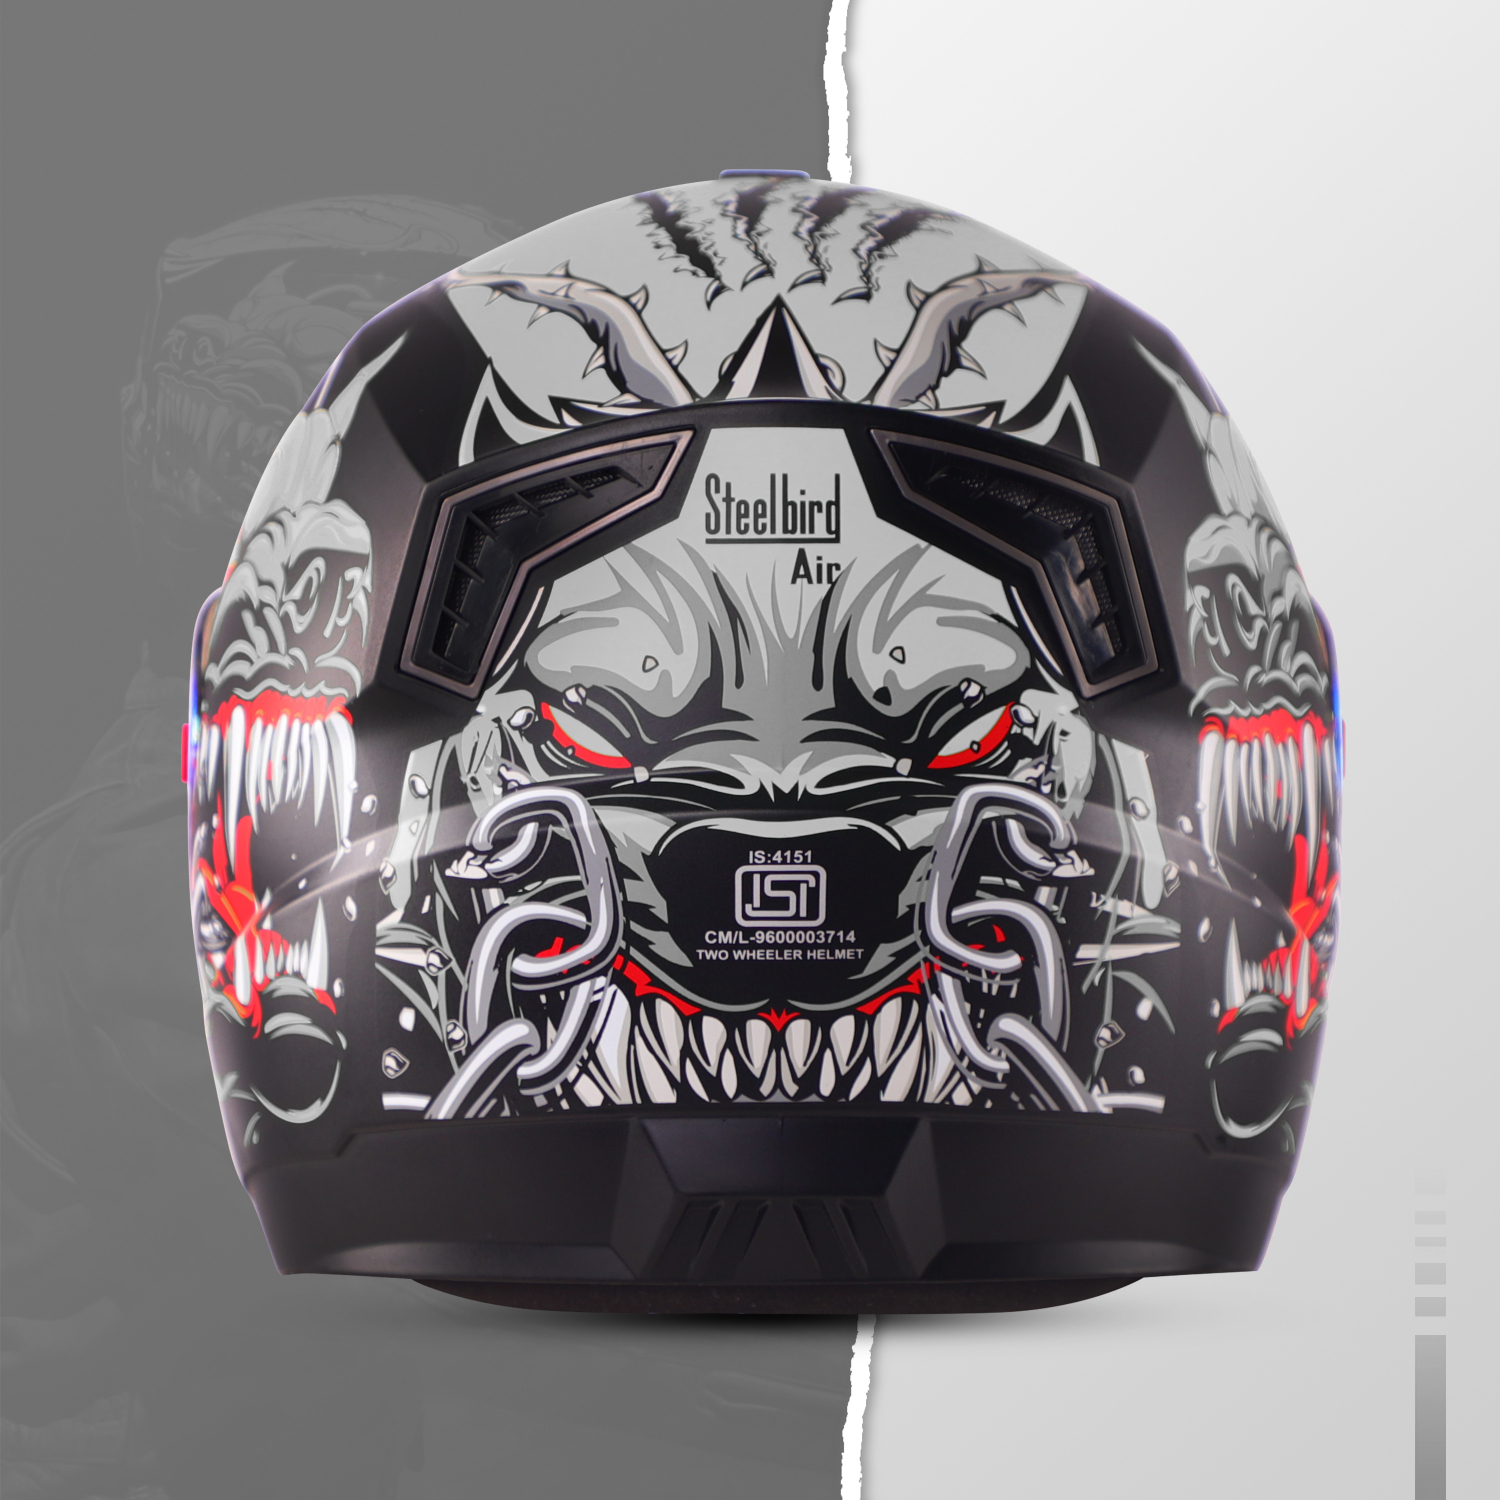 Steelbird SBA-1 Angry Dog ISI Certified Full Face Graphic Helmet For Men And Women With Inner Smoke Sun Shield (Glossy Black Grey With Night Vision Rainbow Visor)